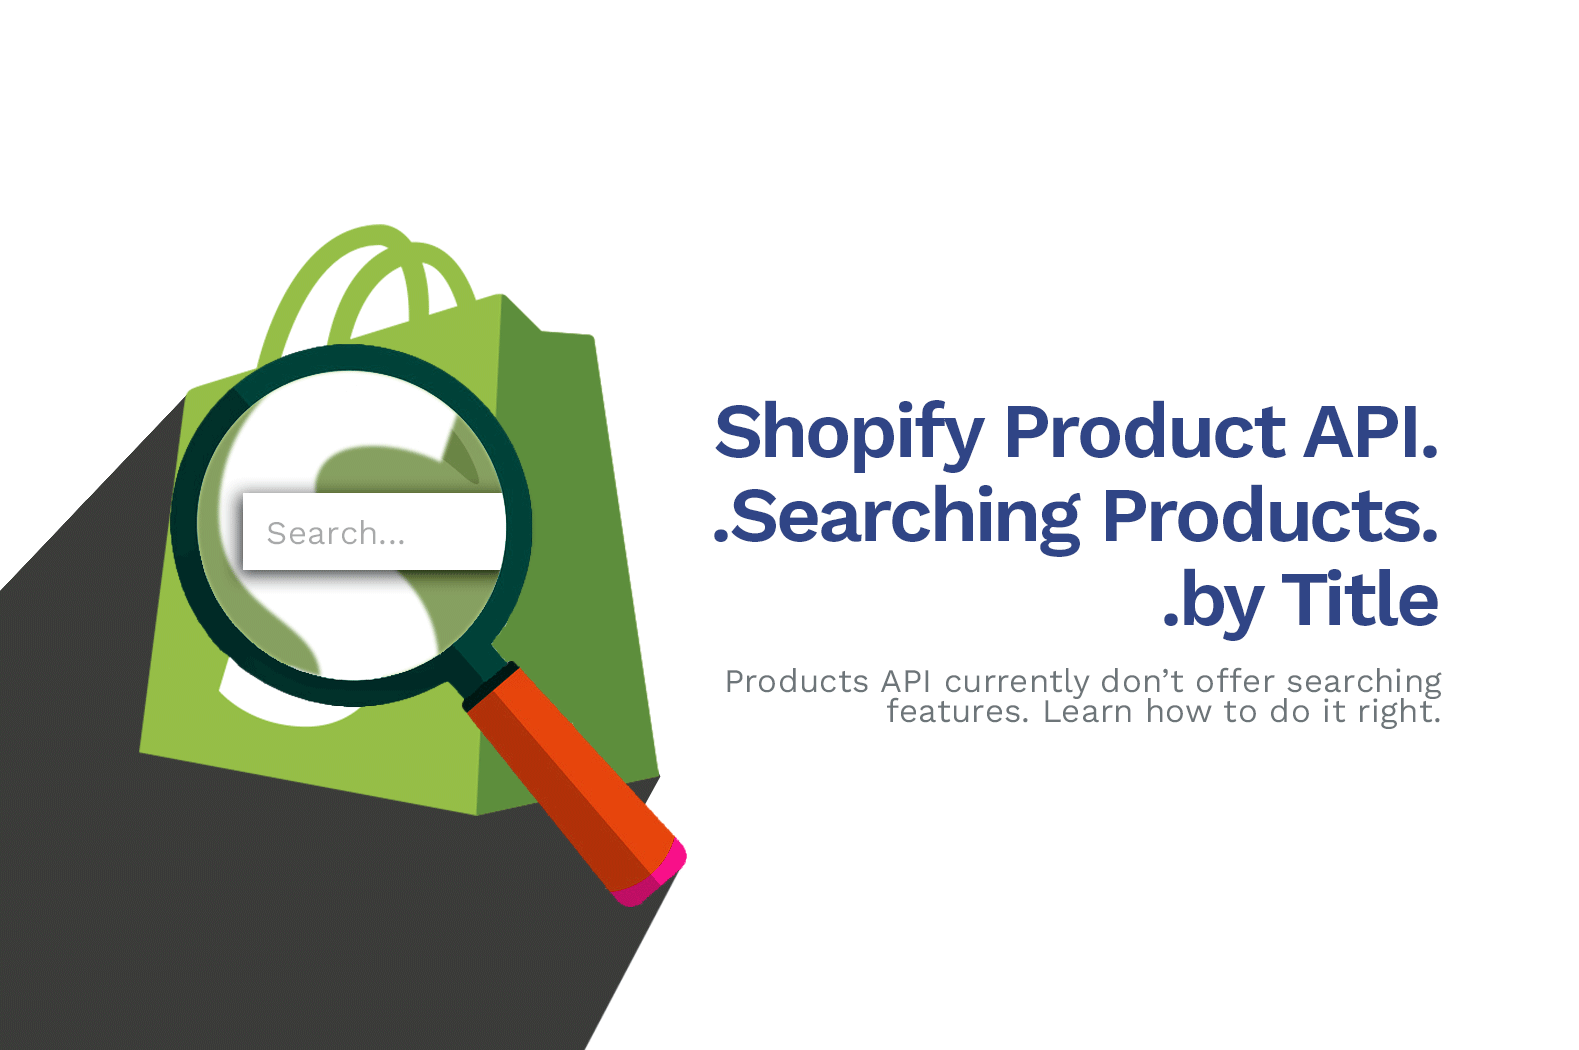 How To Search Shopify Products by Title using Shopify Product API